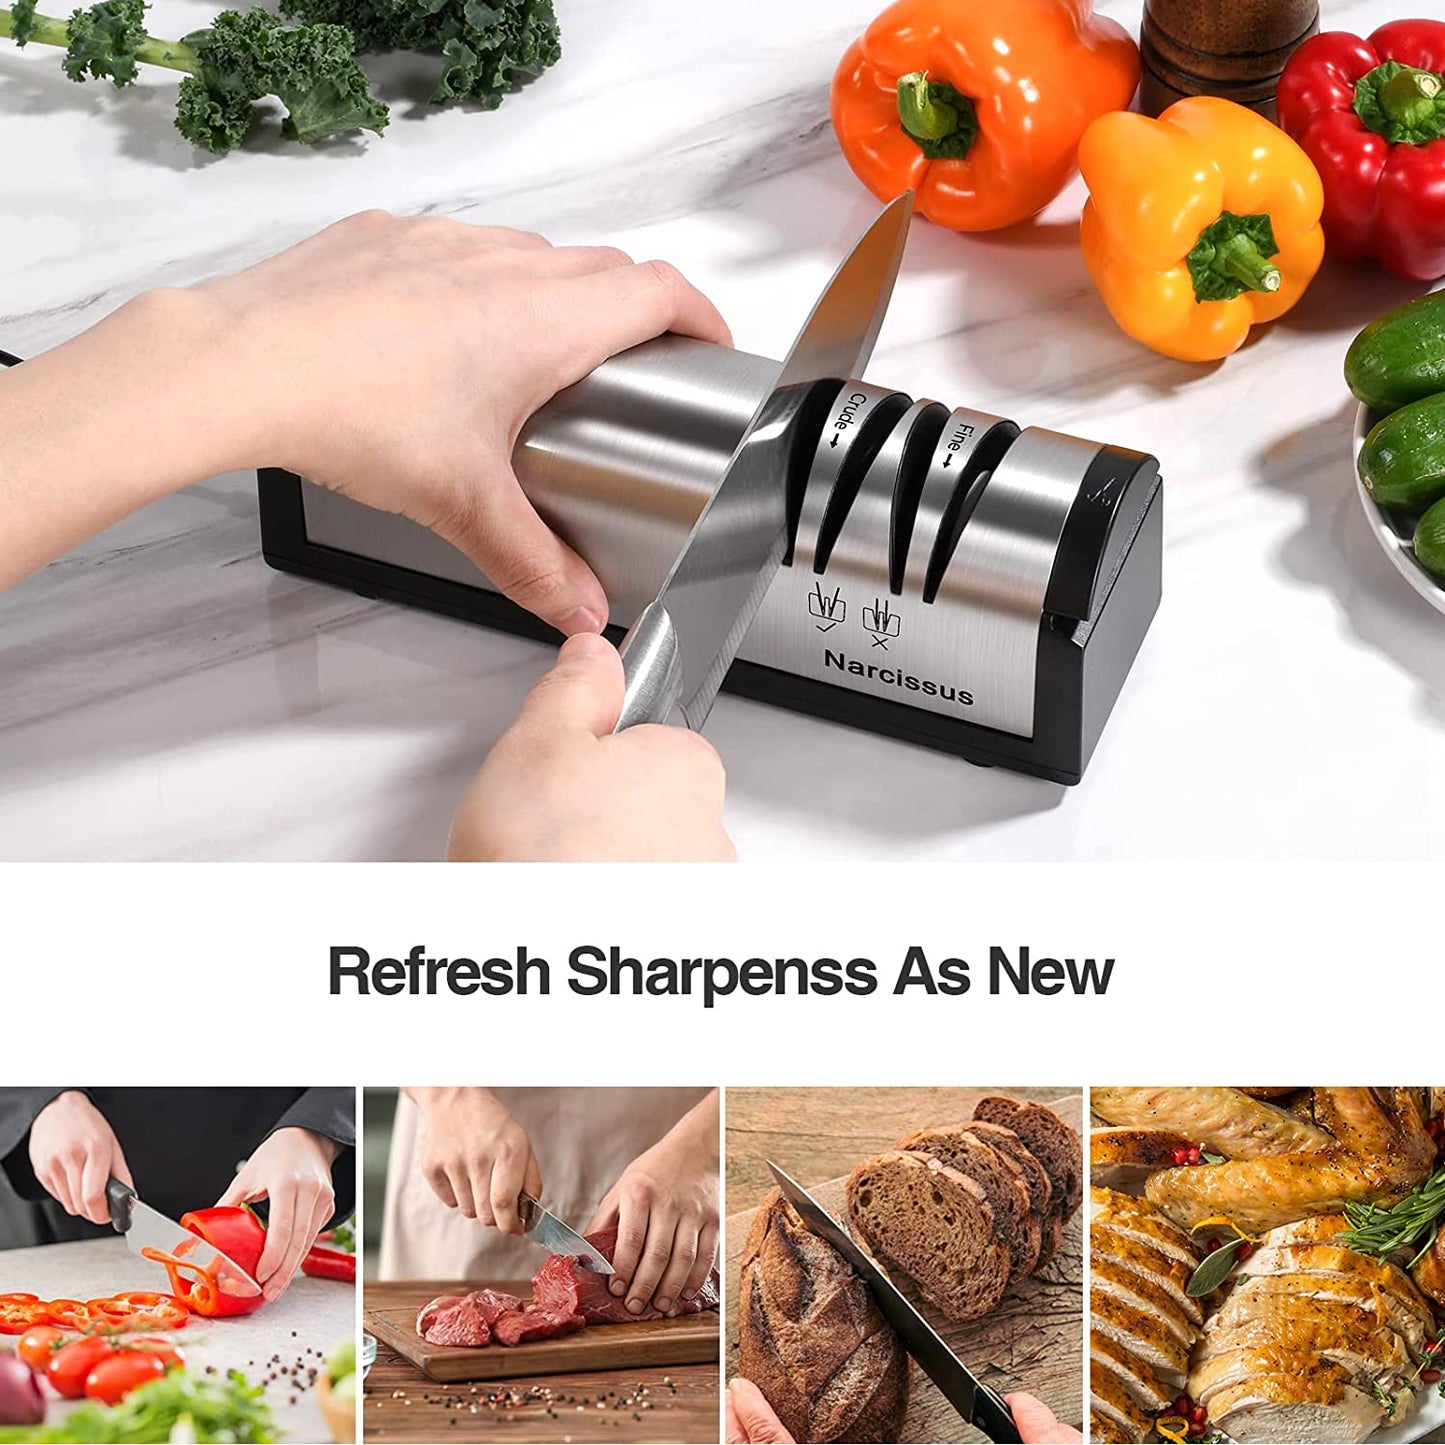 Knife Sharpener, Professional 2 Stage Electric Knife Sharpener for Quick Sharpening & Polishing, with Scissors Sharpener and Metal Dust Collection Box, Stainless Steel, Silver